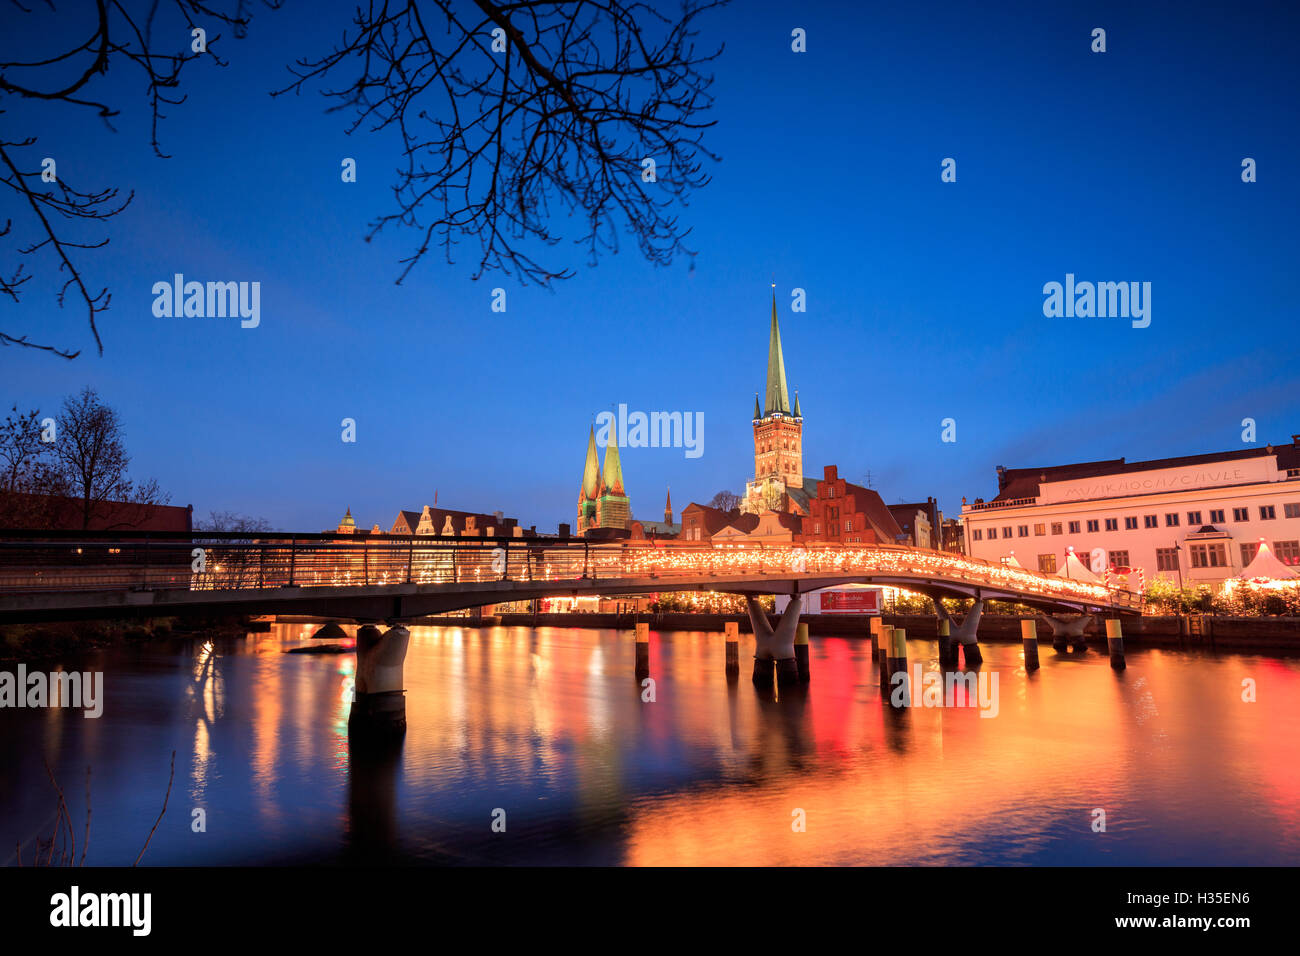 The lights of dusk on typical bridge and the cathedral reflected in River Trave, Lubeck, Schleswig Holstein, Germany Stock Photo